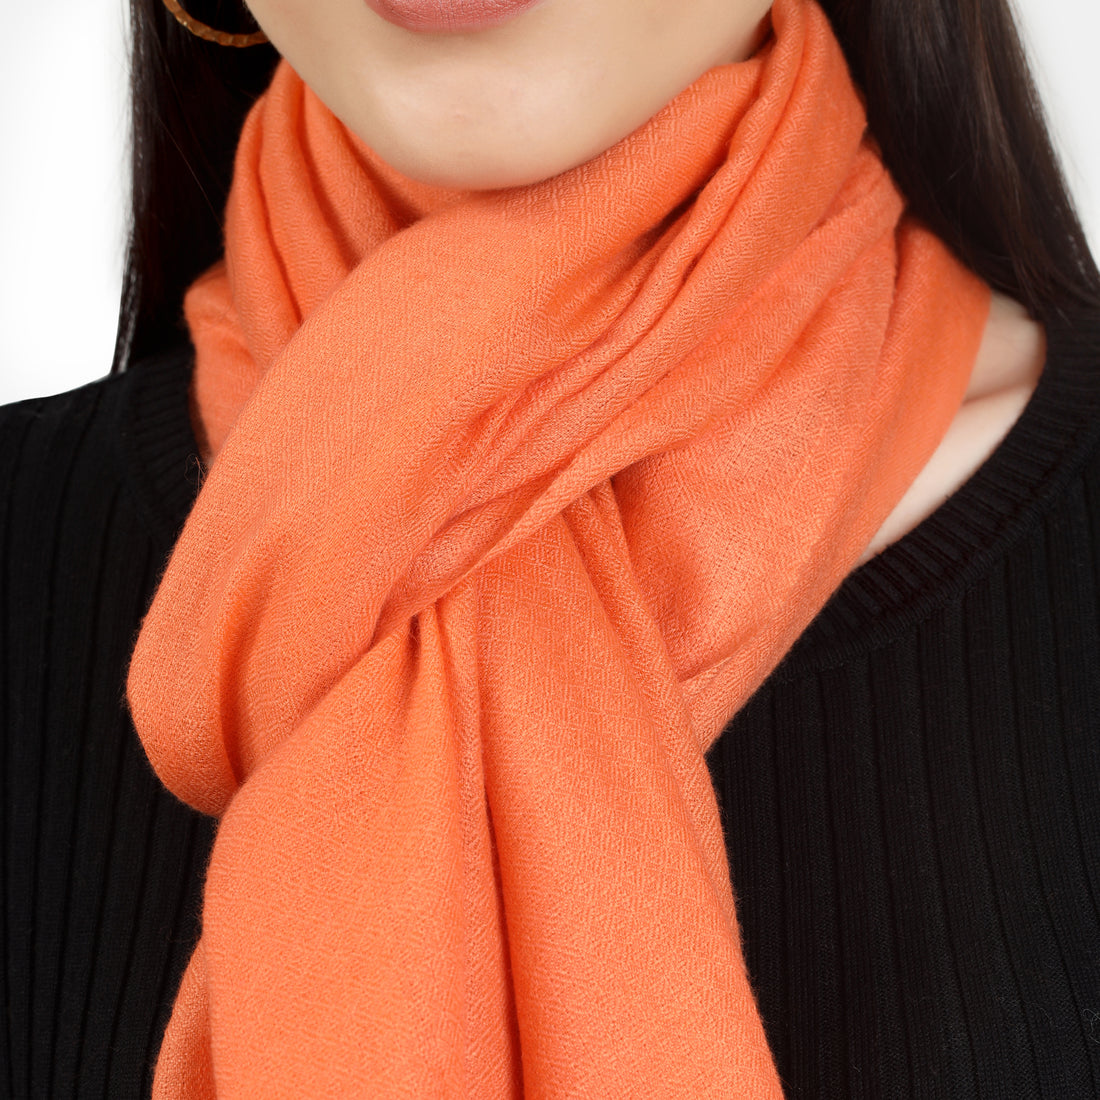 The Benefits of Owning a Cashmere Scarf